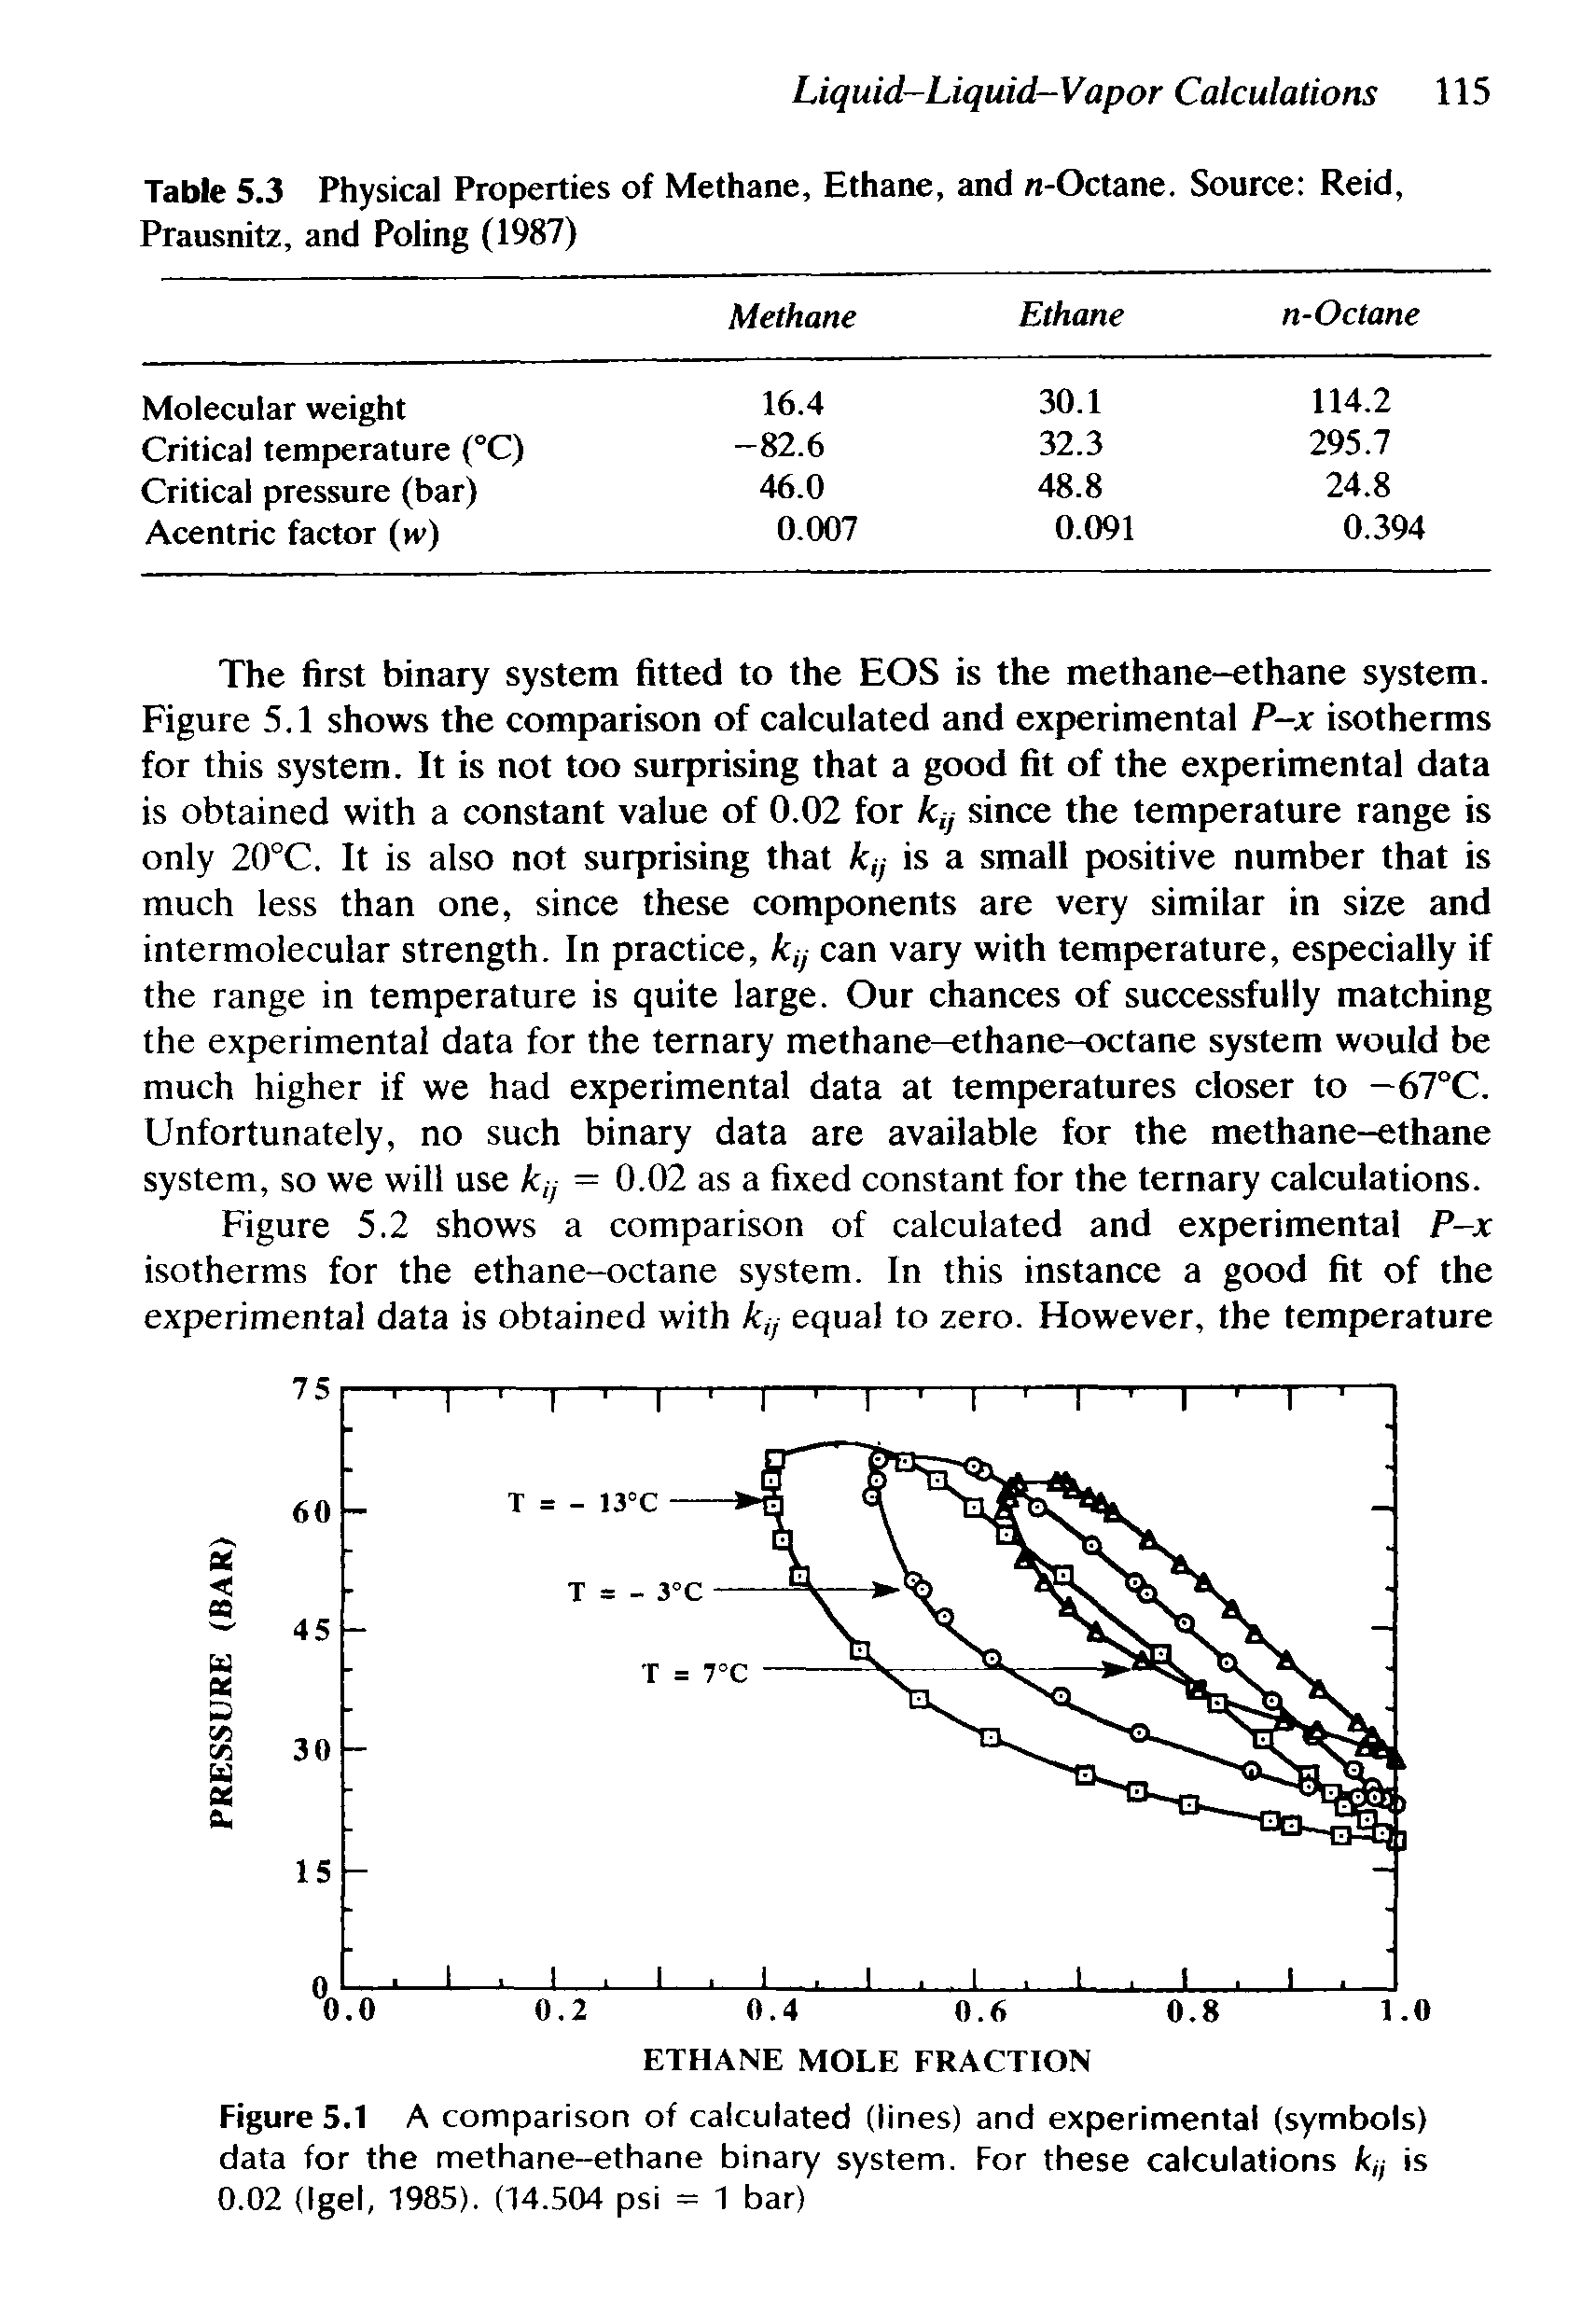 Figure 5.1 A comparison of calculated (lines) and experimental (symbols) data for the methane-ethane binary system. For these calculations k) is 0.02 (Igel, 1985). (14.504 psi = 1 bar)...